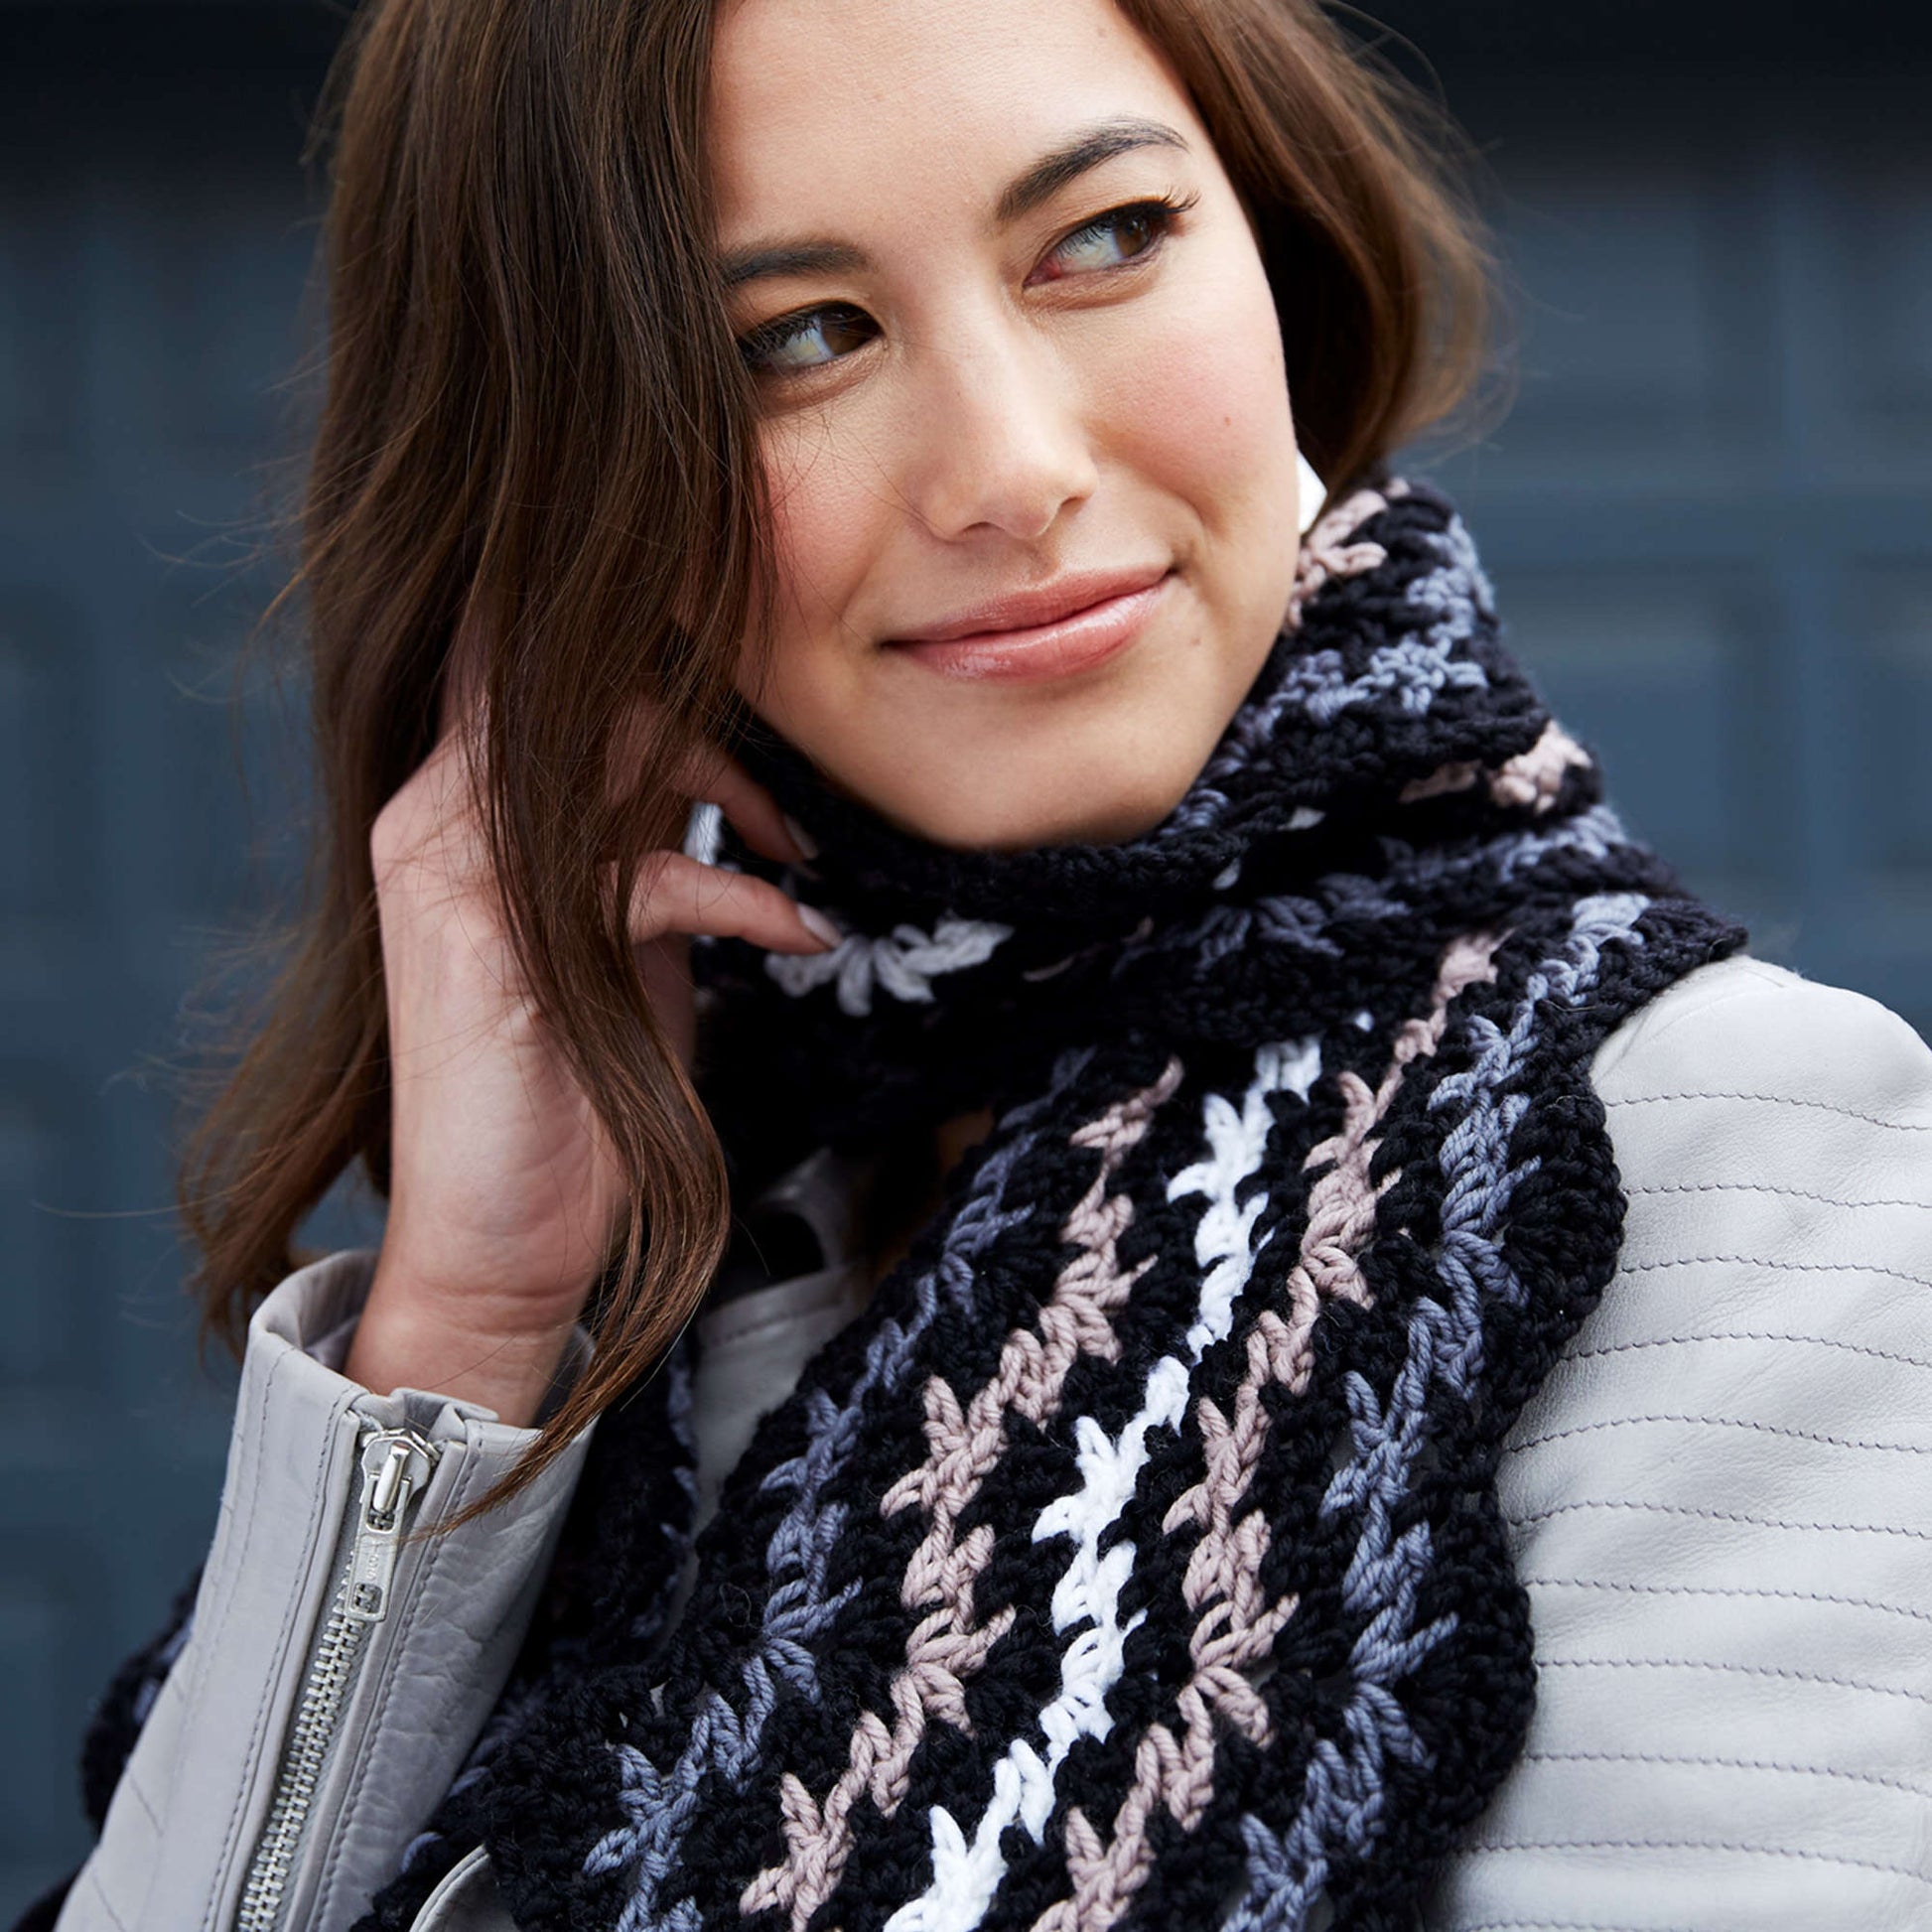 Free Red Heart Crochet Victory Chic Scarf Pattern